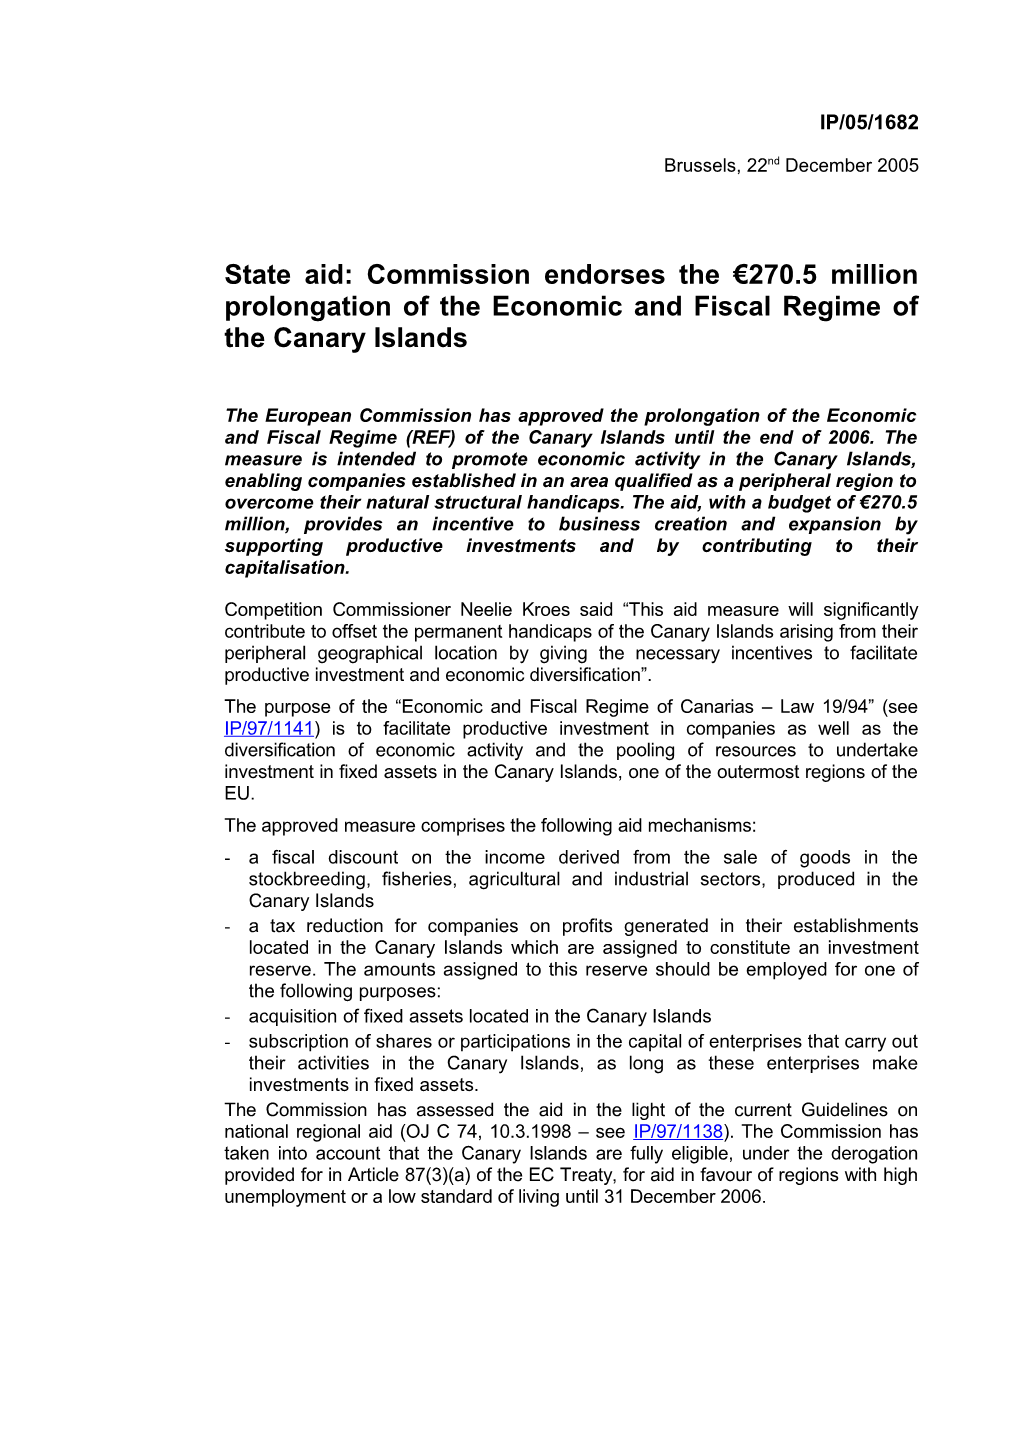 State Aid: Commission Endorses the 270.5 Million Prolongation of the Economic and Fiscal